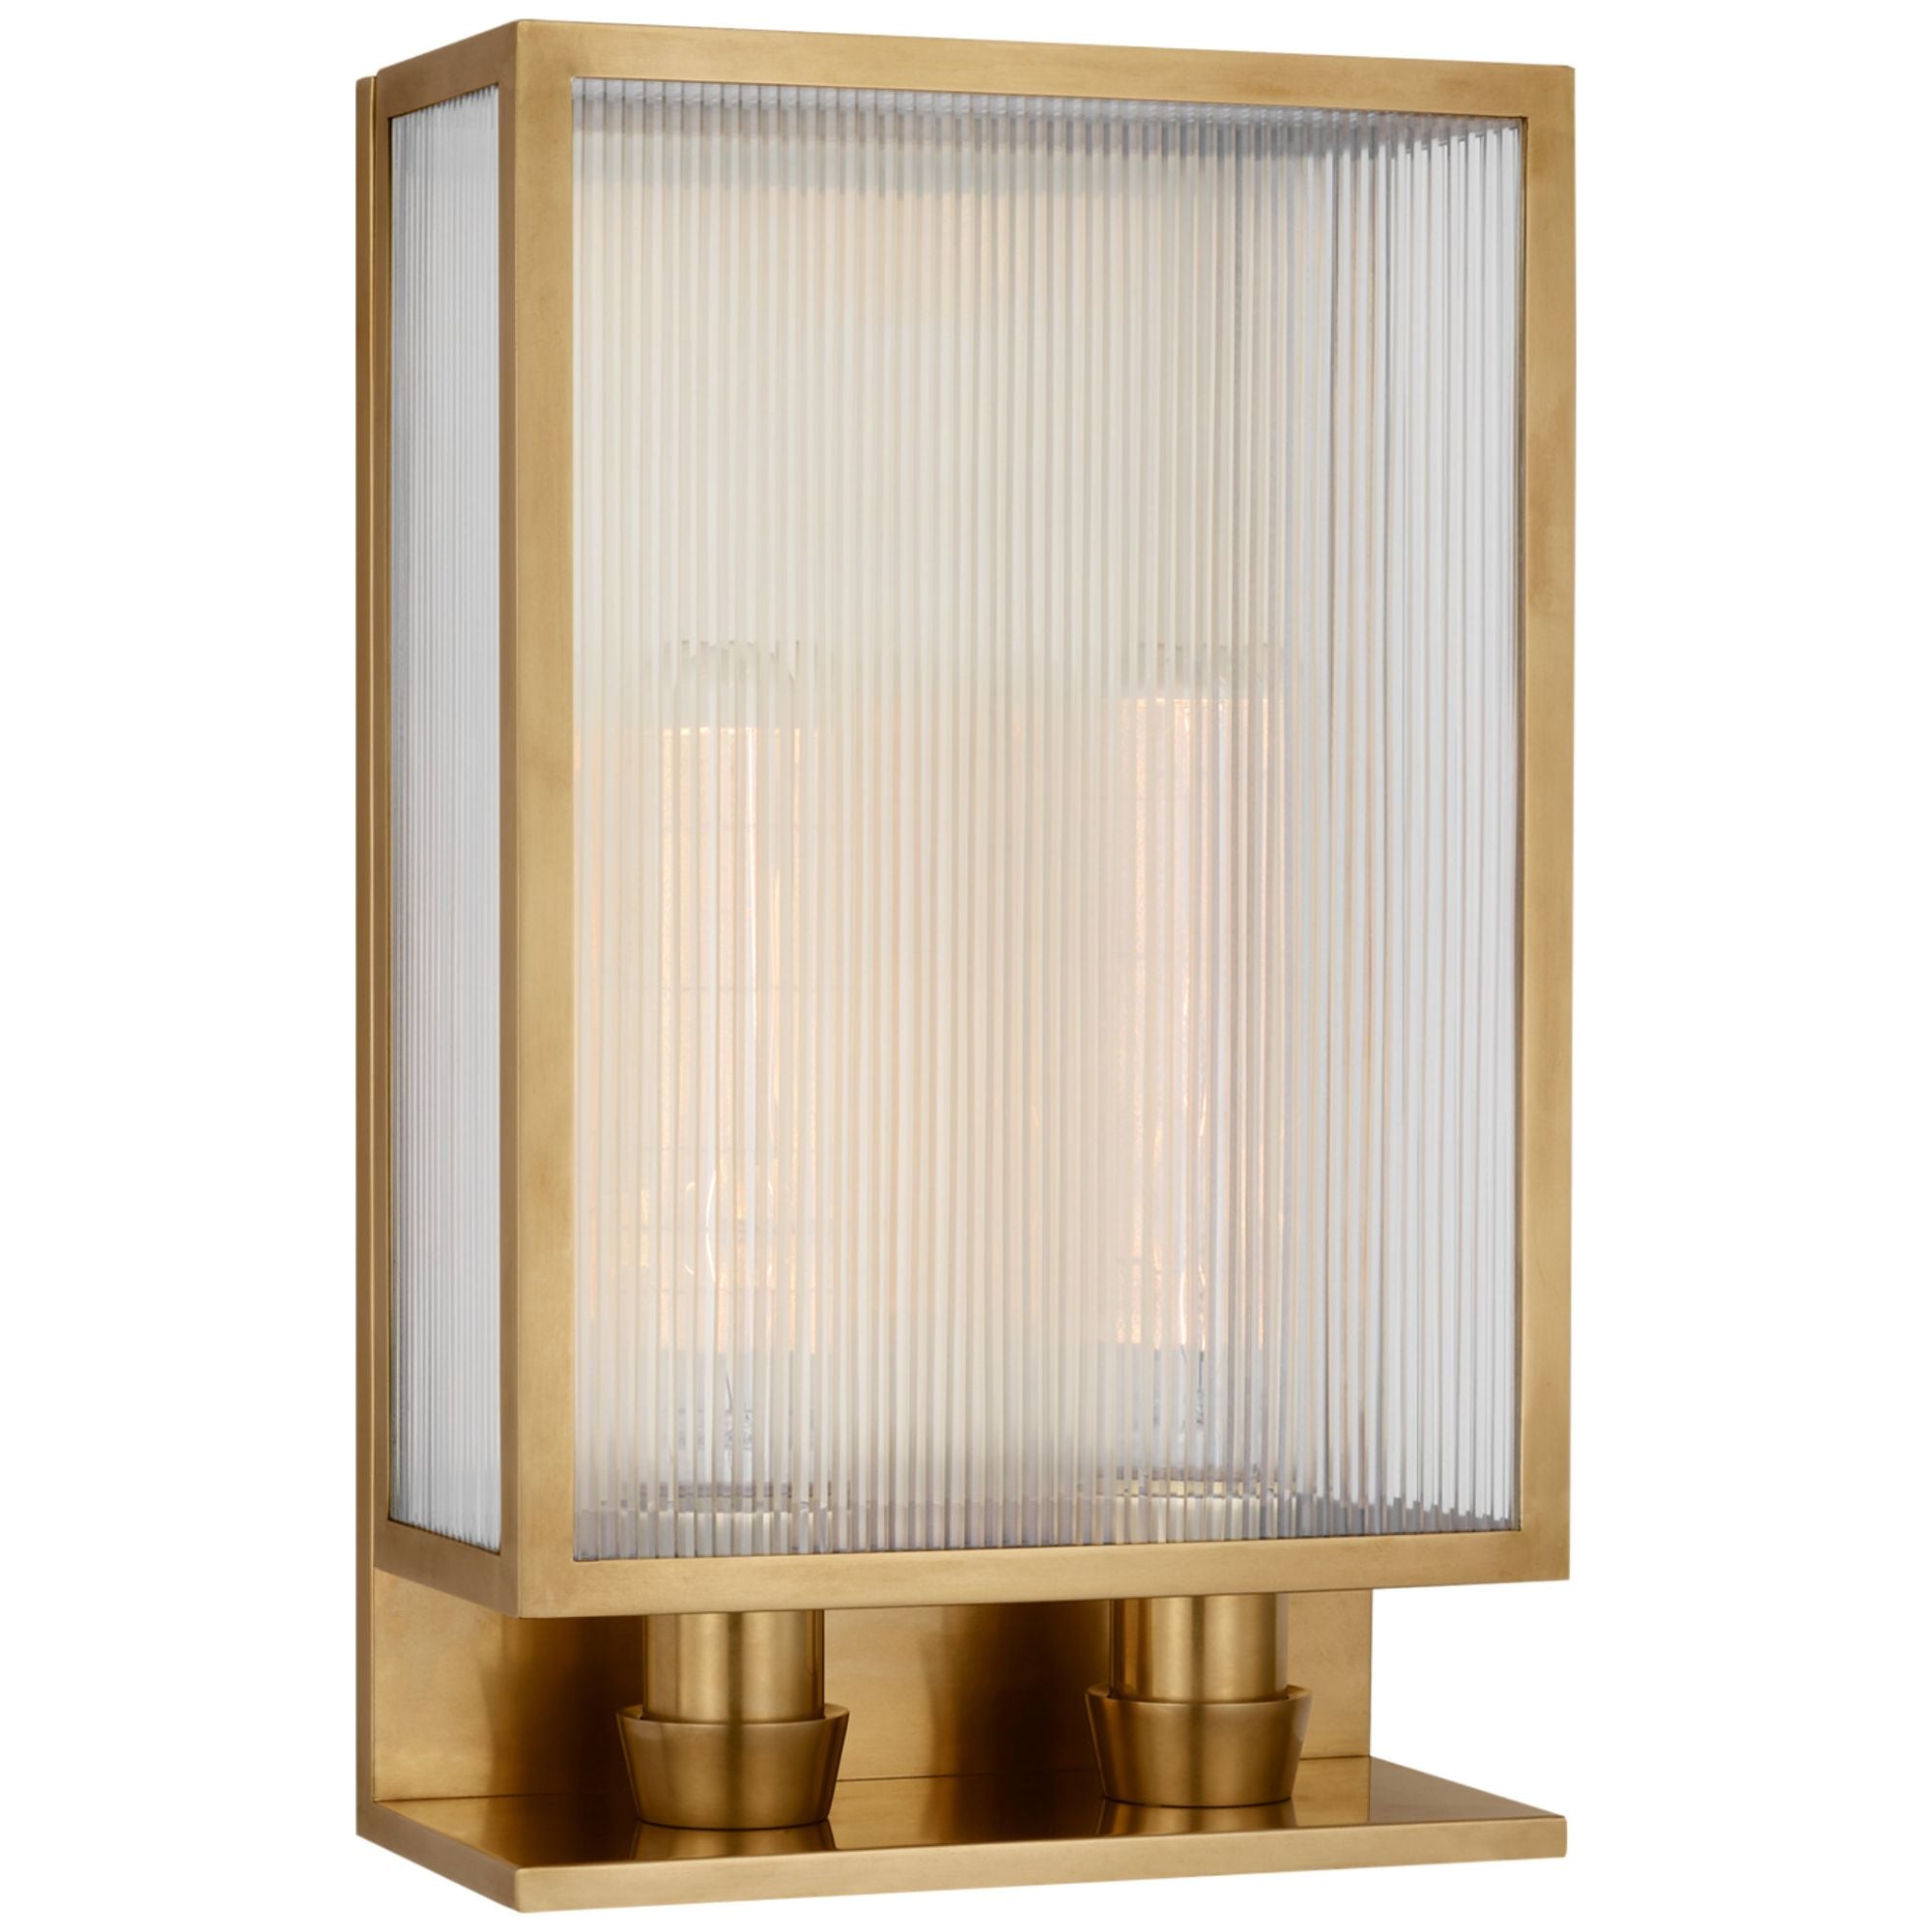 Barbara Barry York 16" Double Box Sconce in Soft Brass with Clear Ribbed Glass